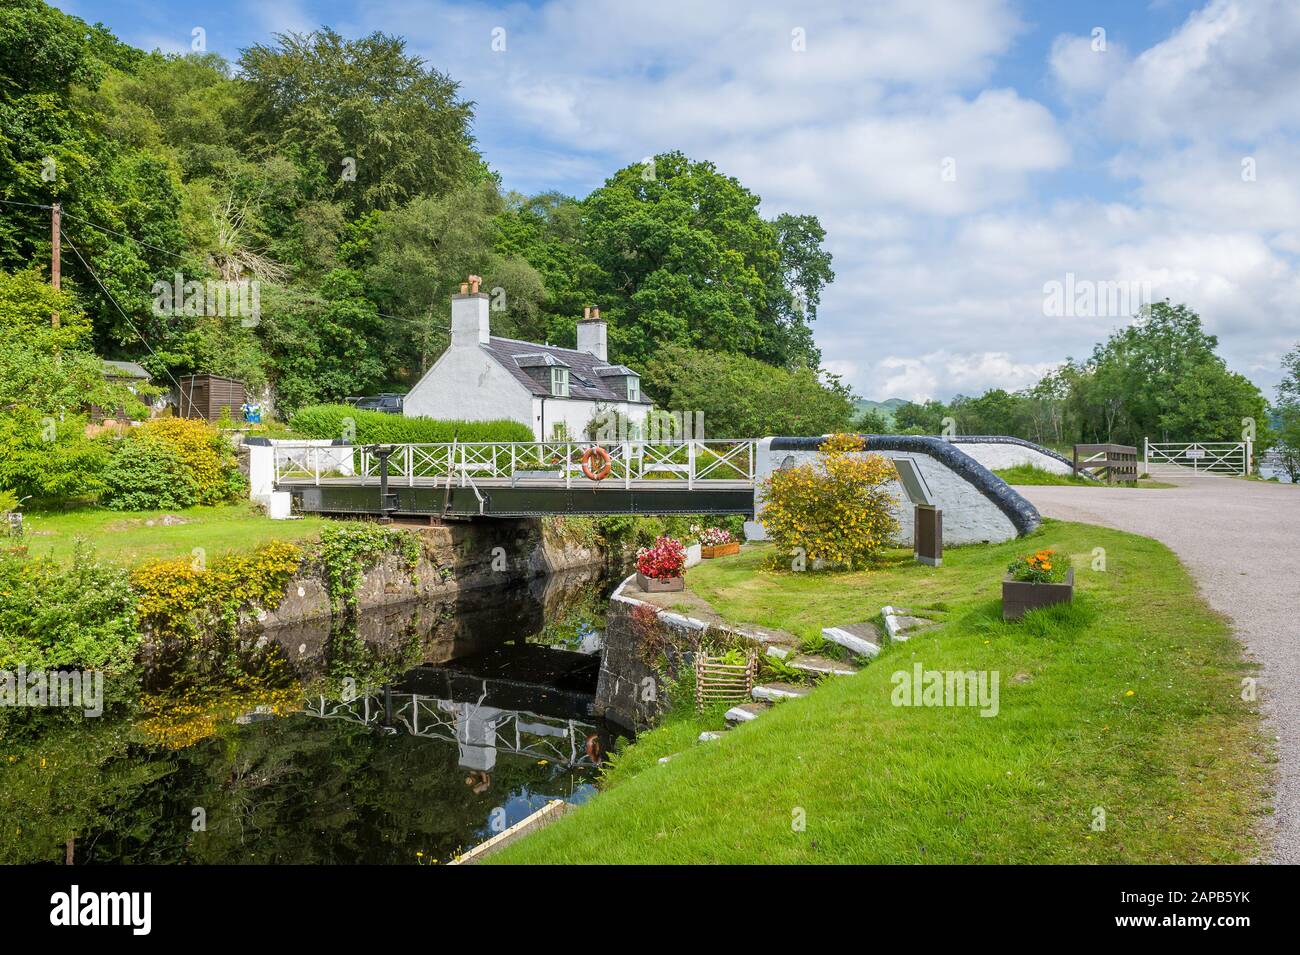 Beauty of Crinan canal - scenic water way with gates and bridges. Summer in Scotland. Stock Photo